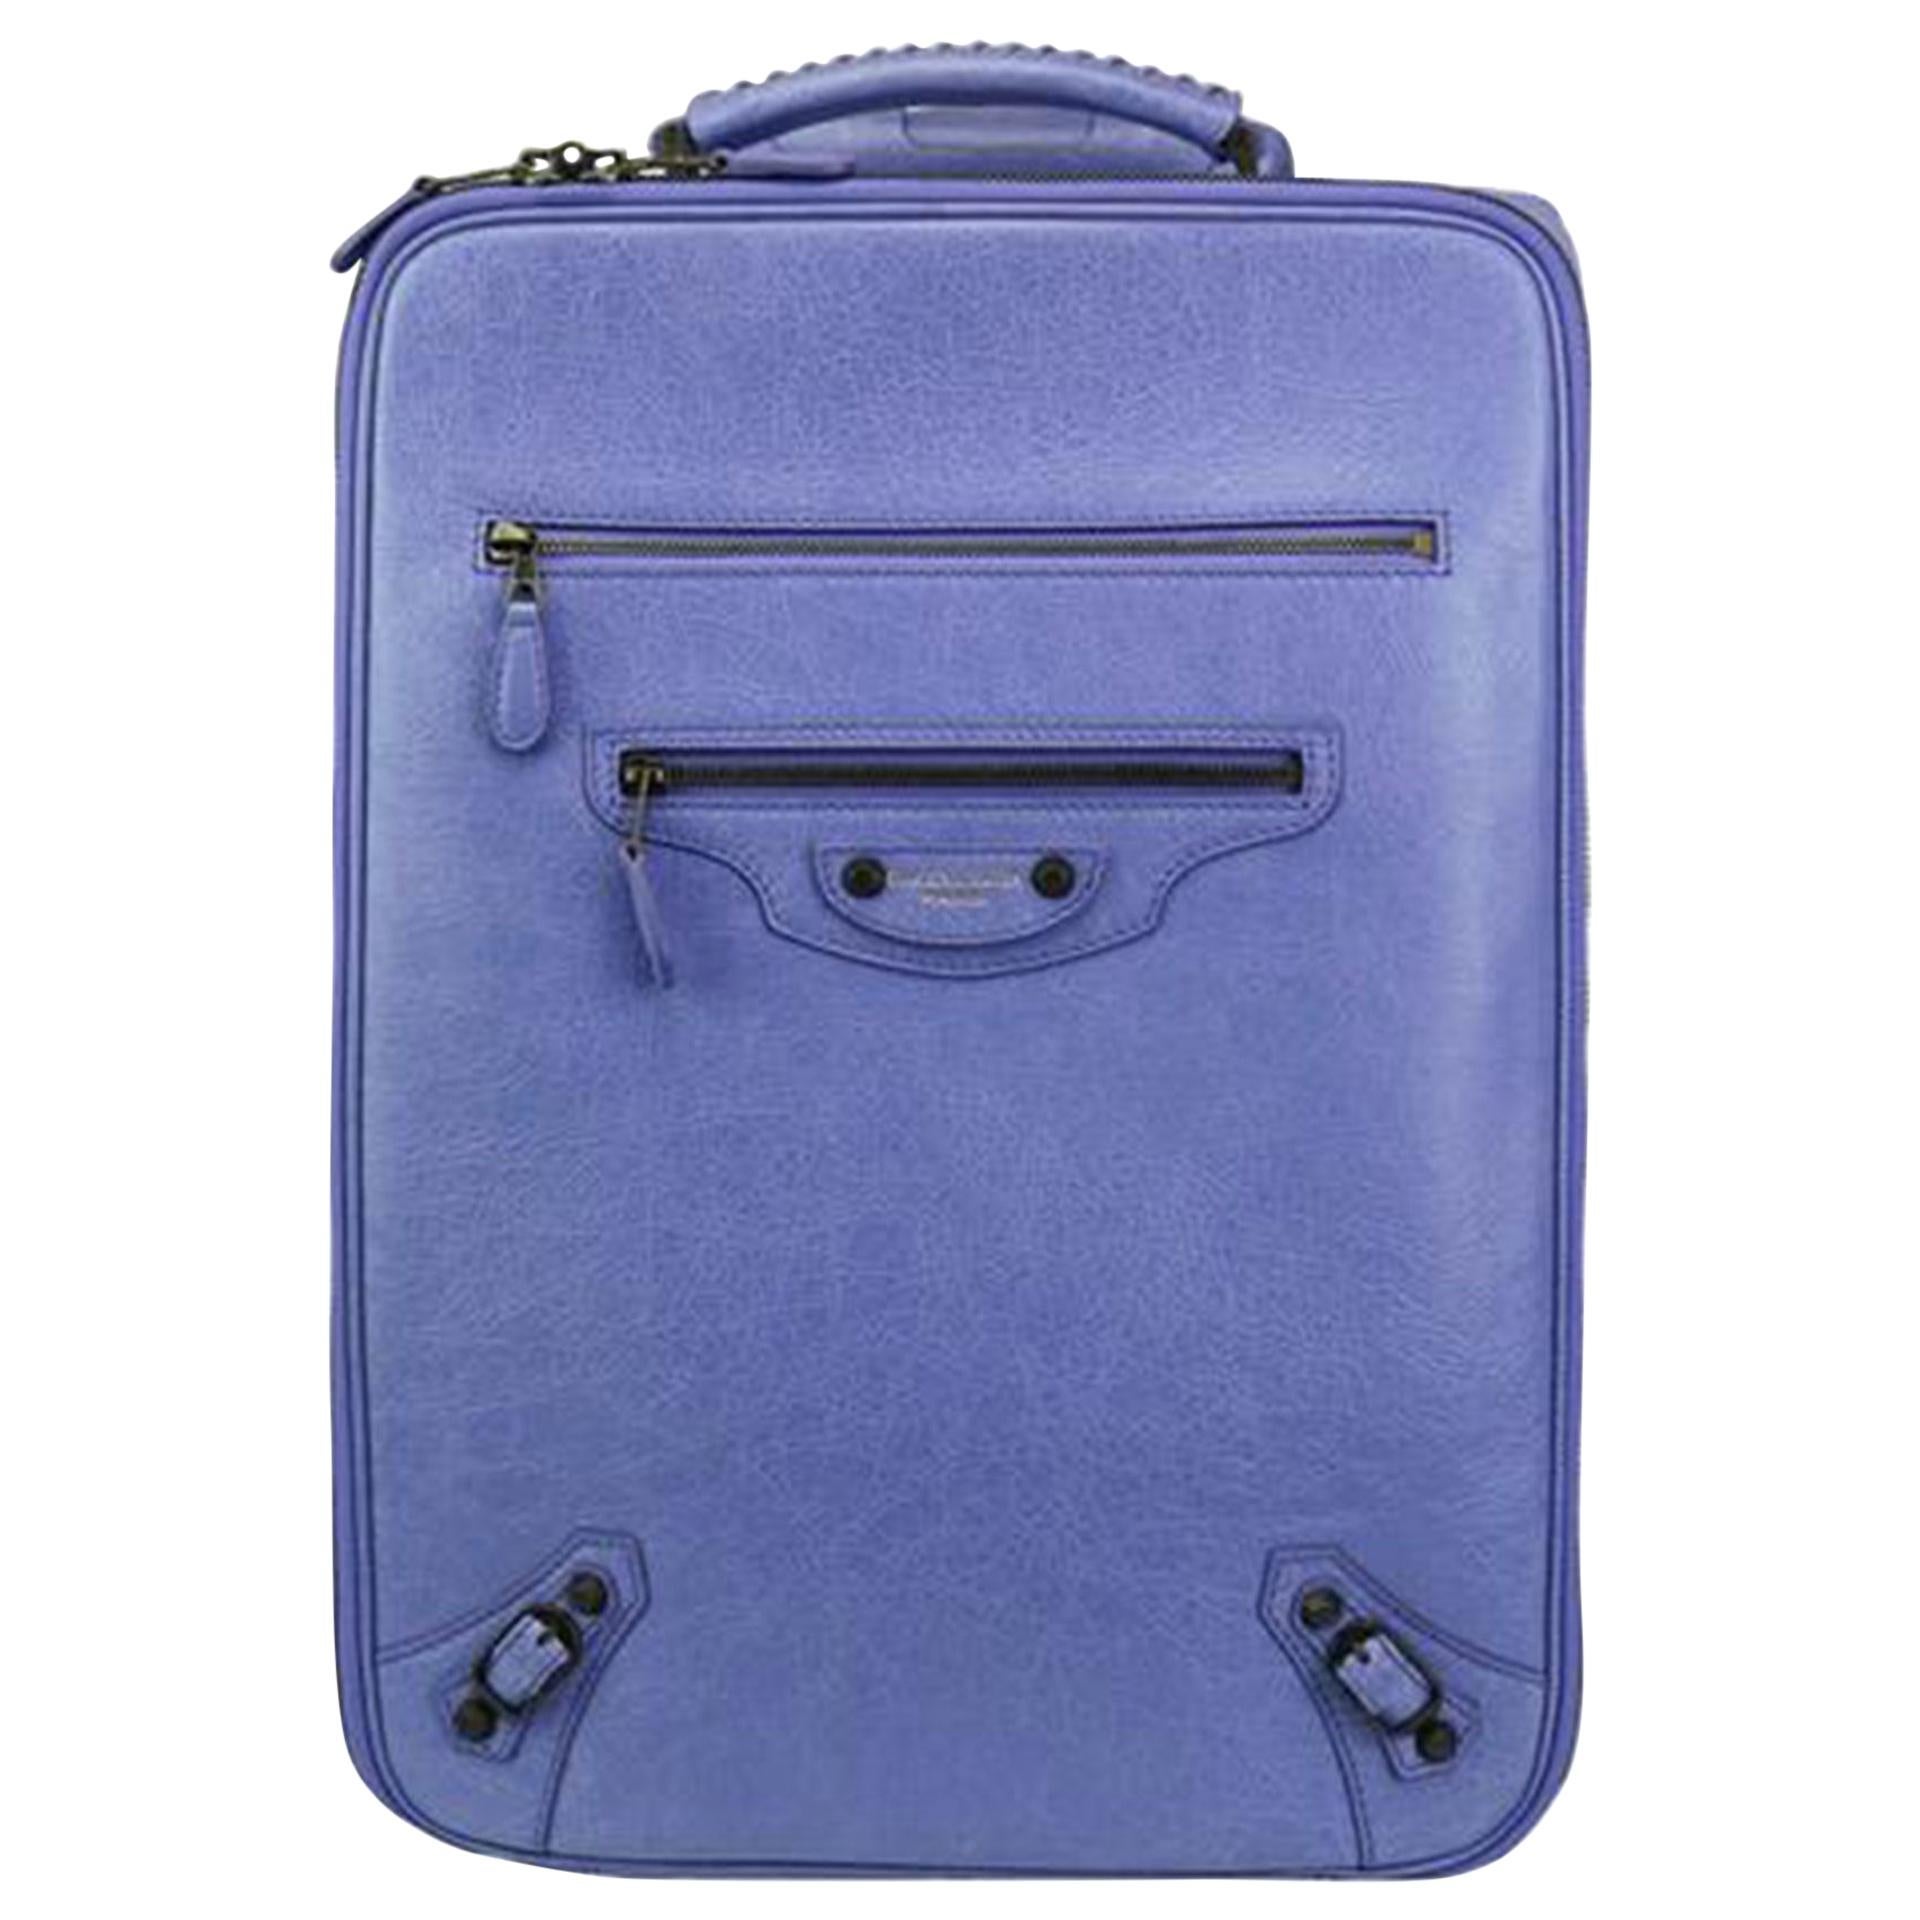 Vintage Balenciaga Luggage and Travel Bags - 2 For Sale at 1stDibs | balenciaga  travel luggage, balenciaga carry on luggage, balenciaga travel bags